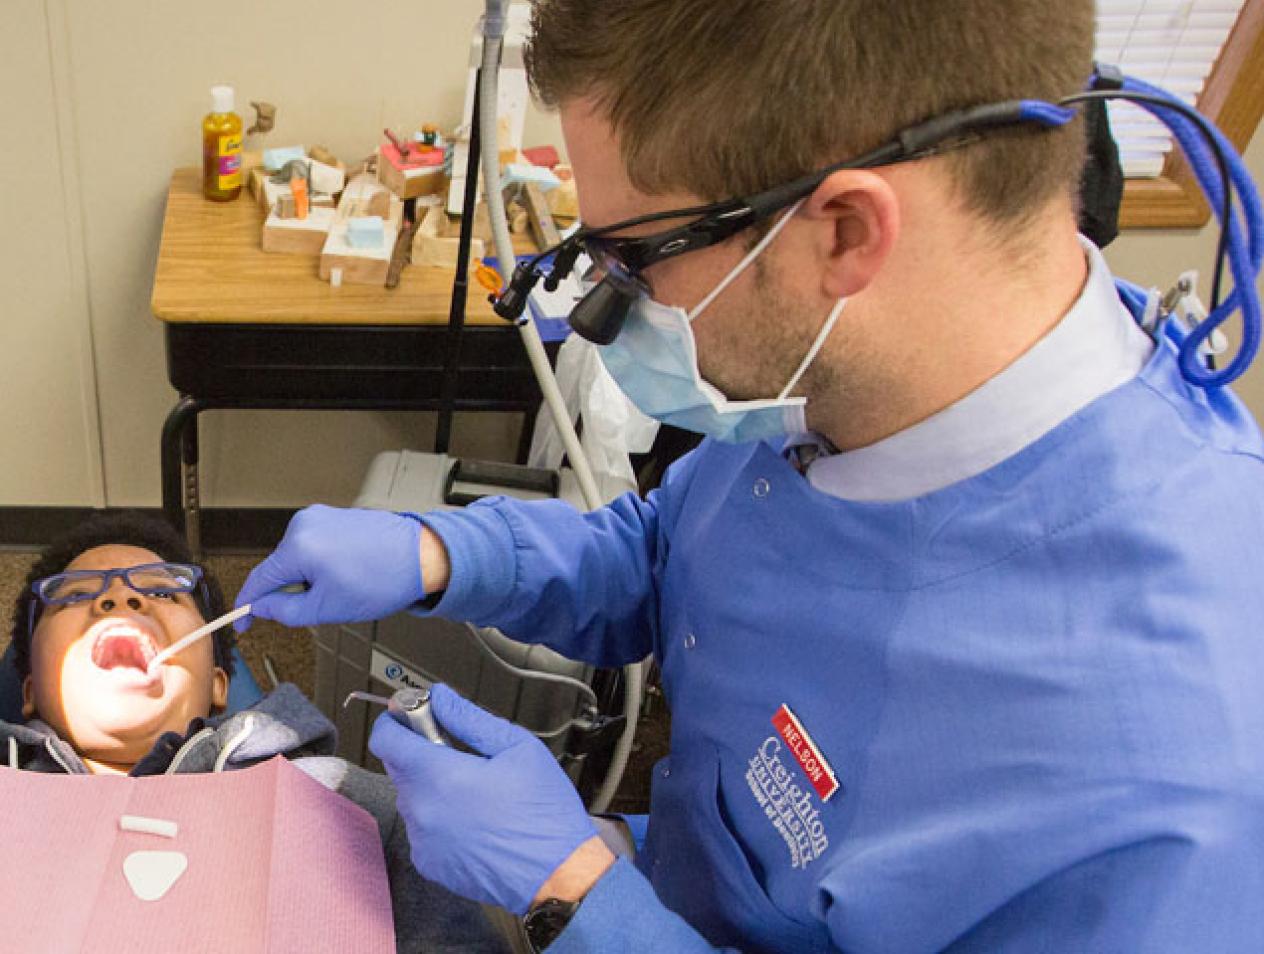 Creighton Dentistry providing dental care to patient in the community.